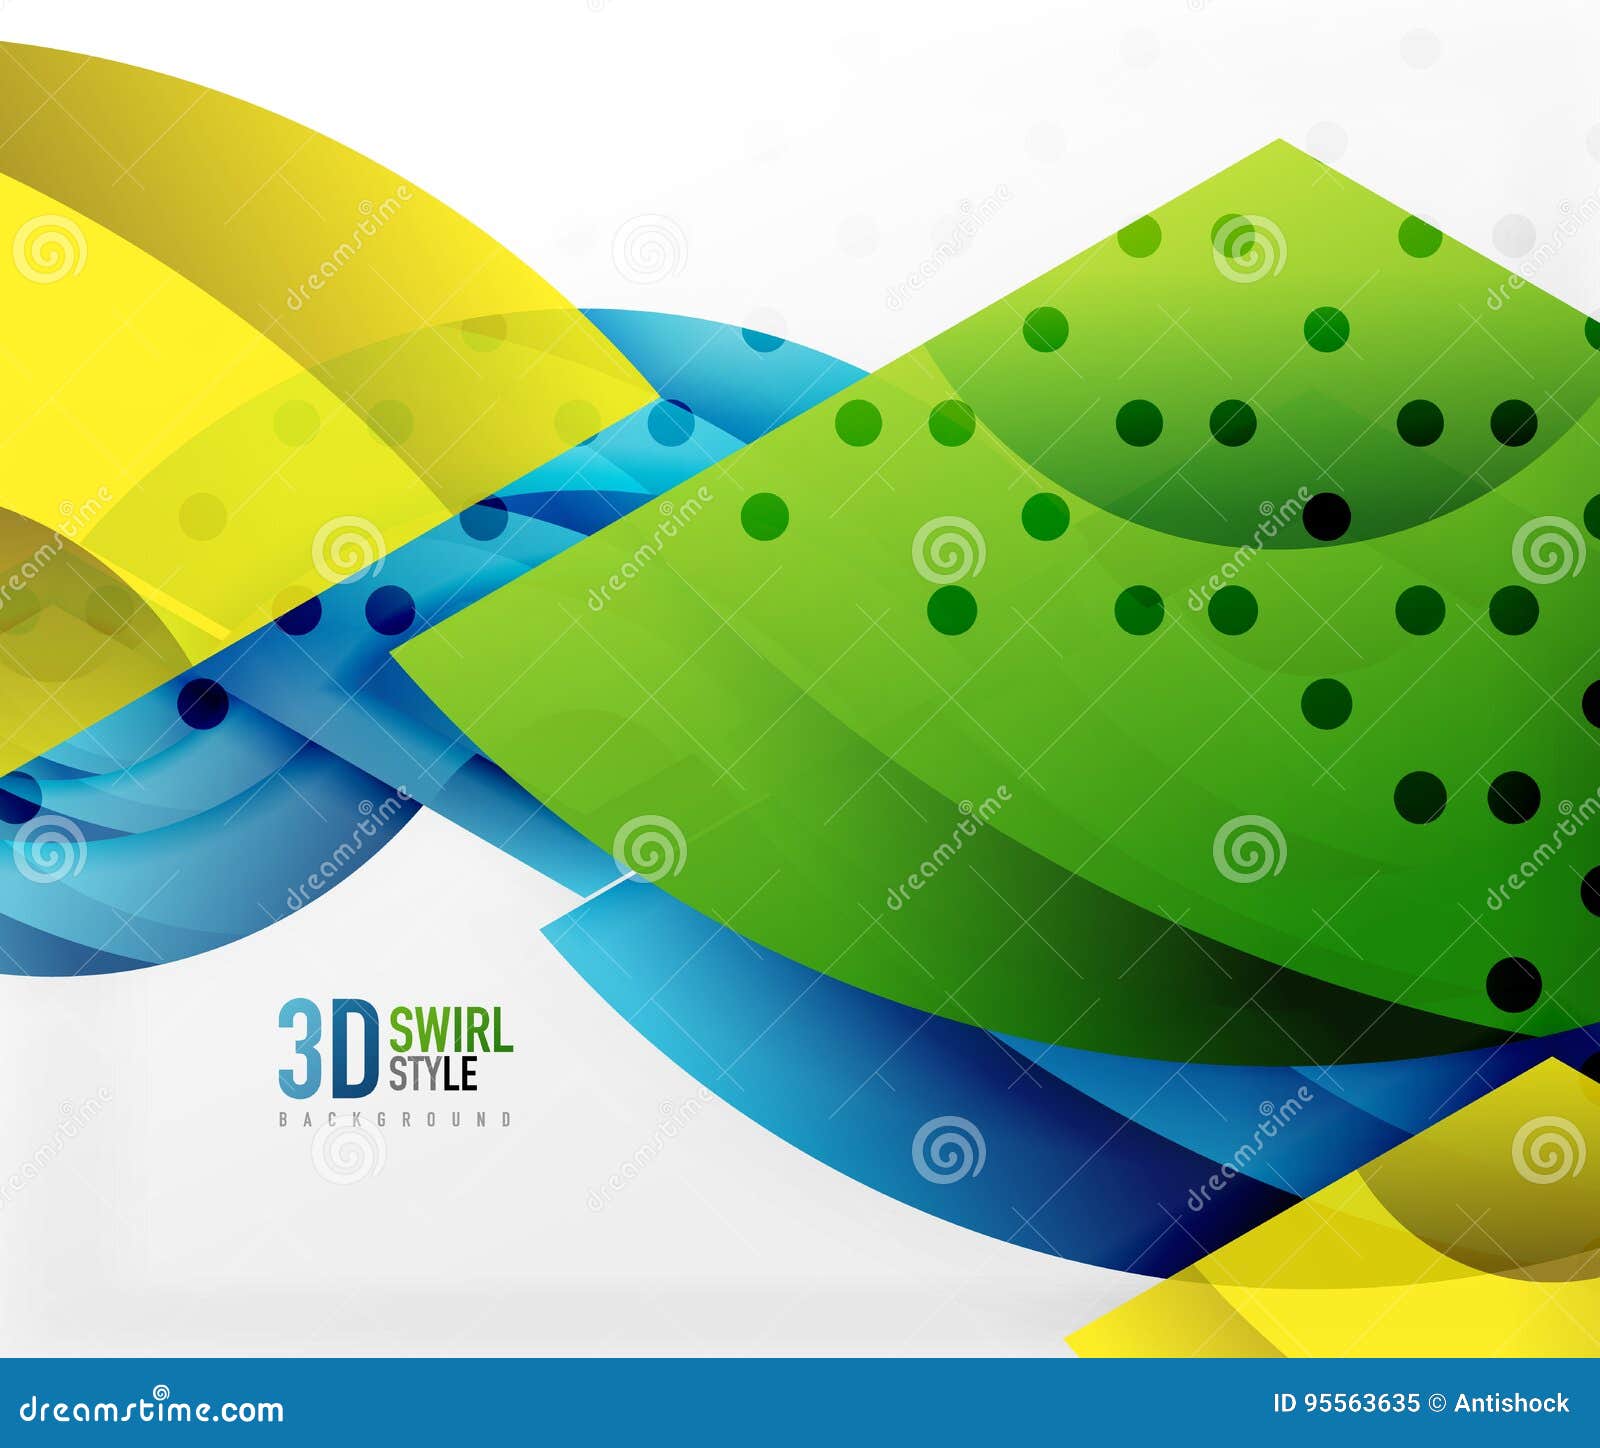 Download Swirl And Wave 3d Effect Objects, Abstract Template Vector Design Stock Vector - Illustration of ...